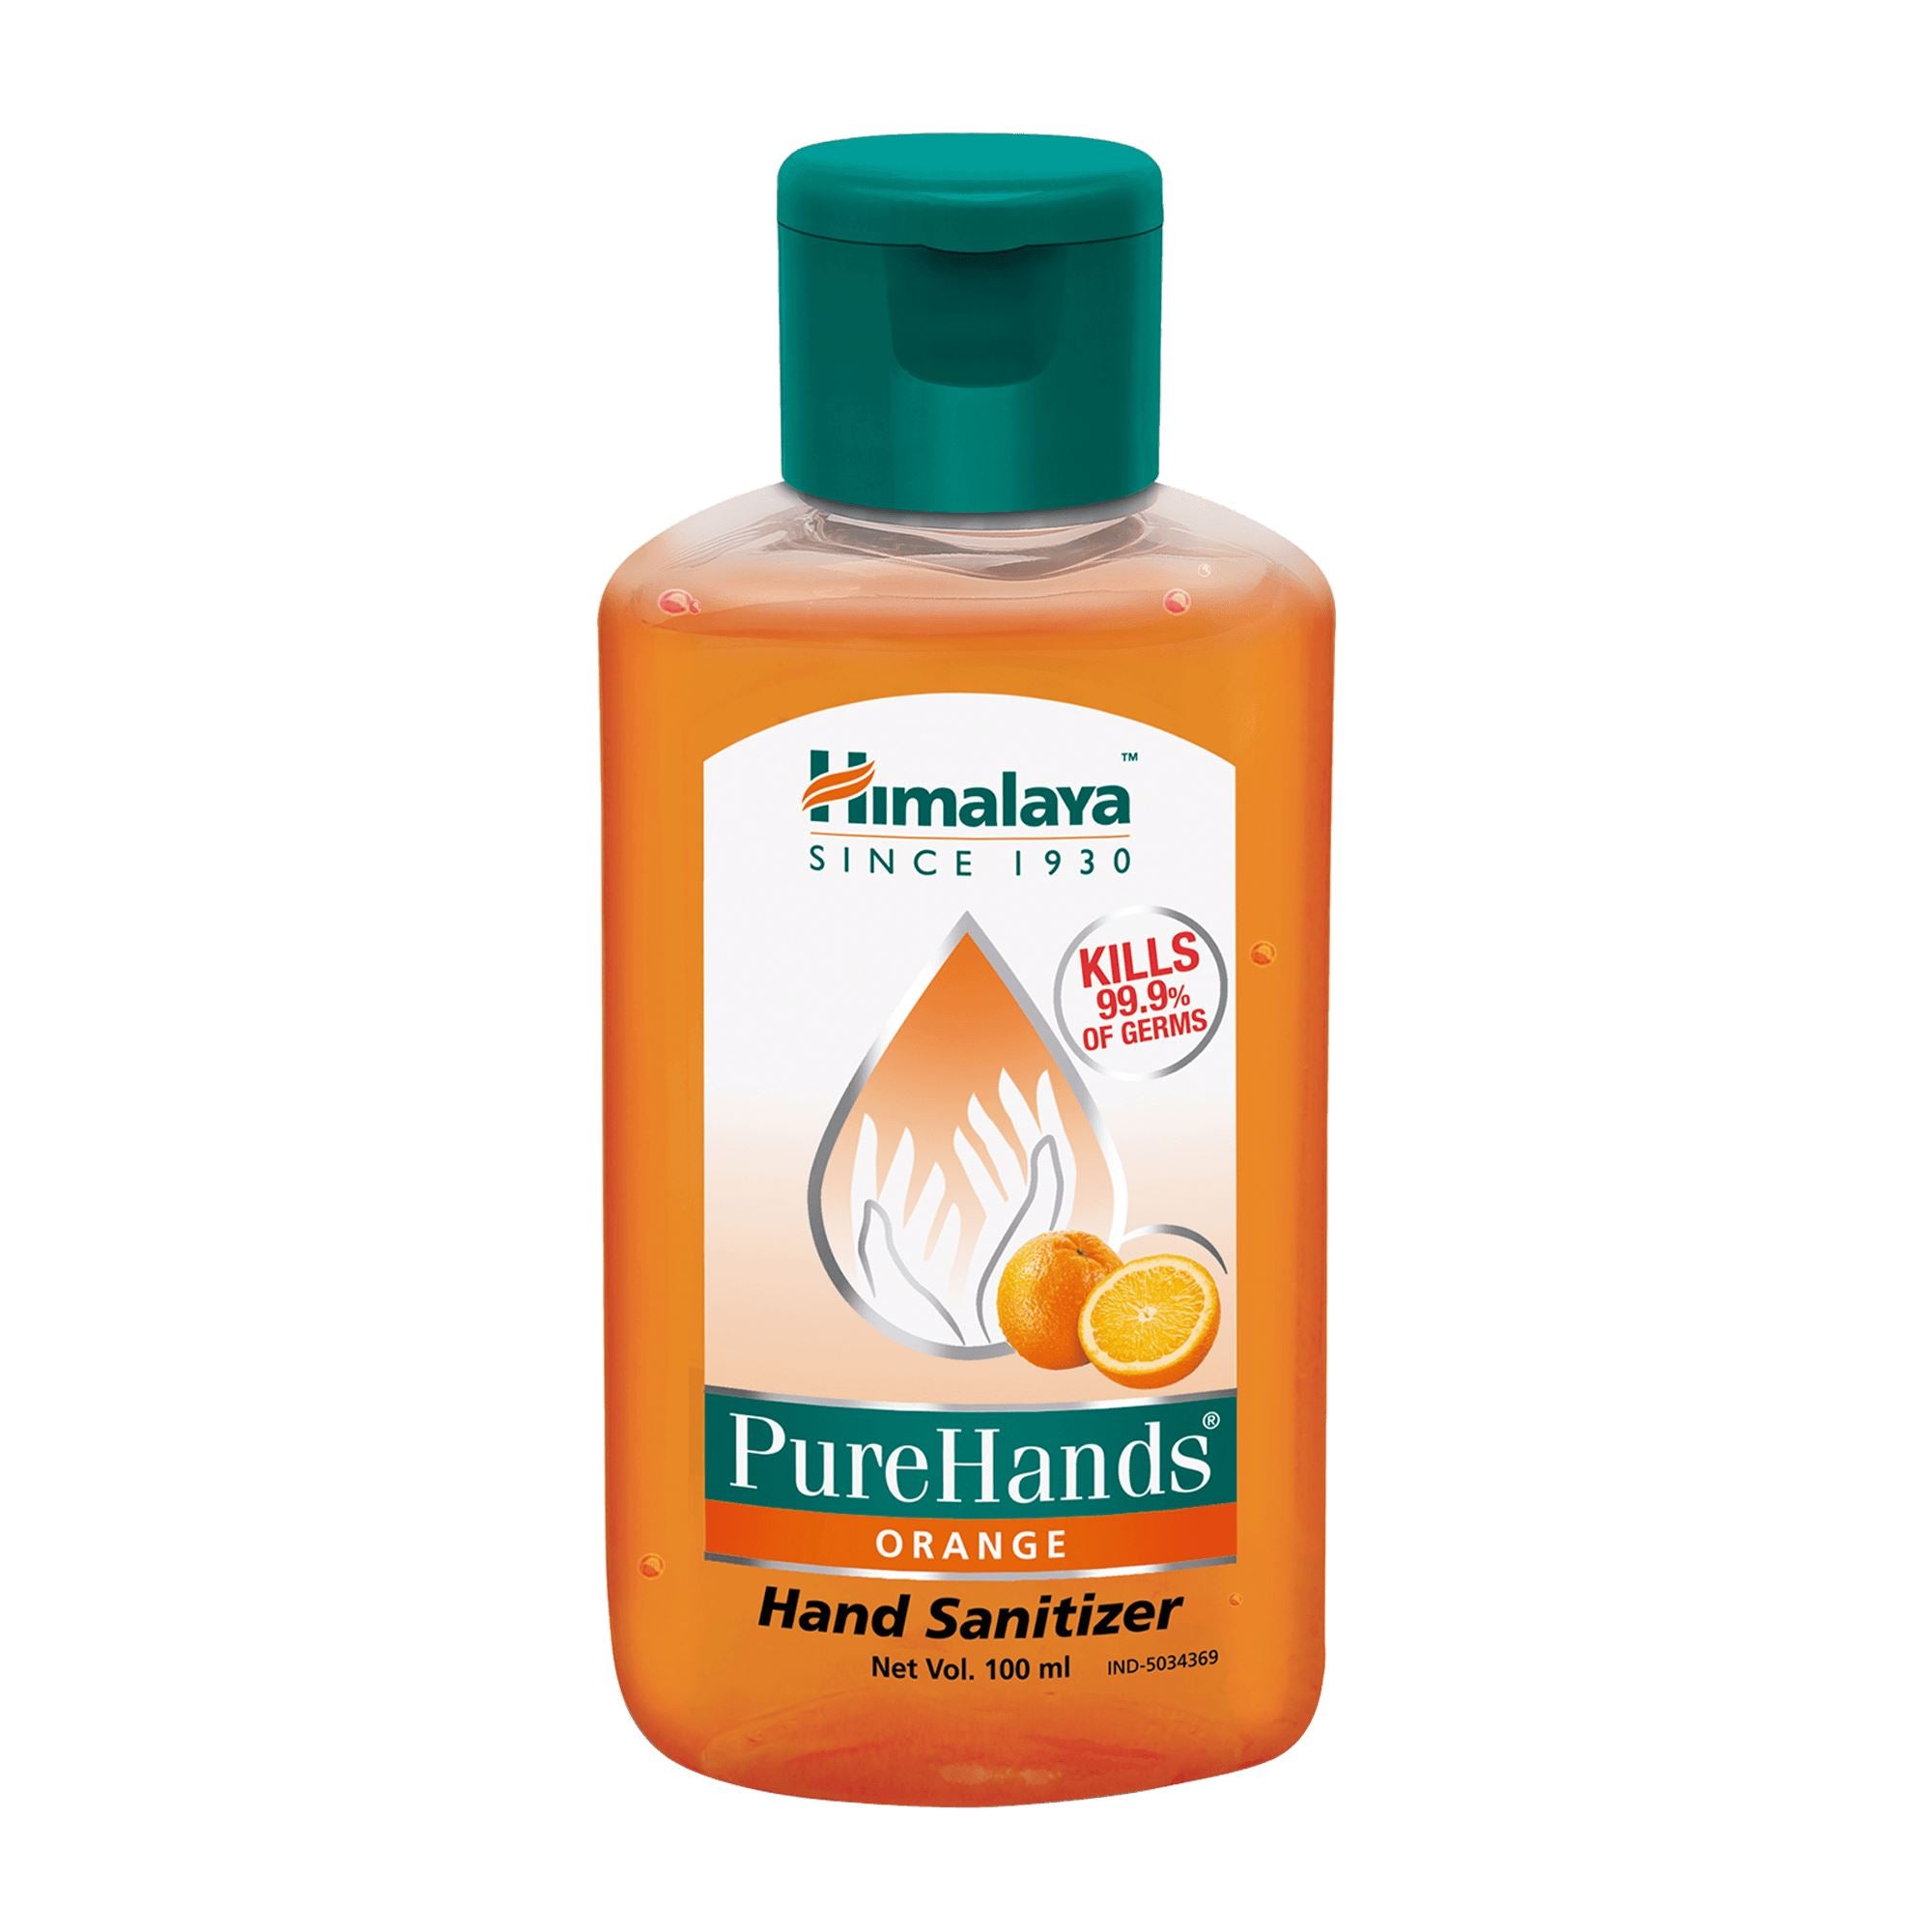 Himalaya PureHands Hand Sanitizer - Helps prevent infection and ensures total hand hygiene